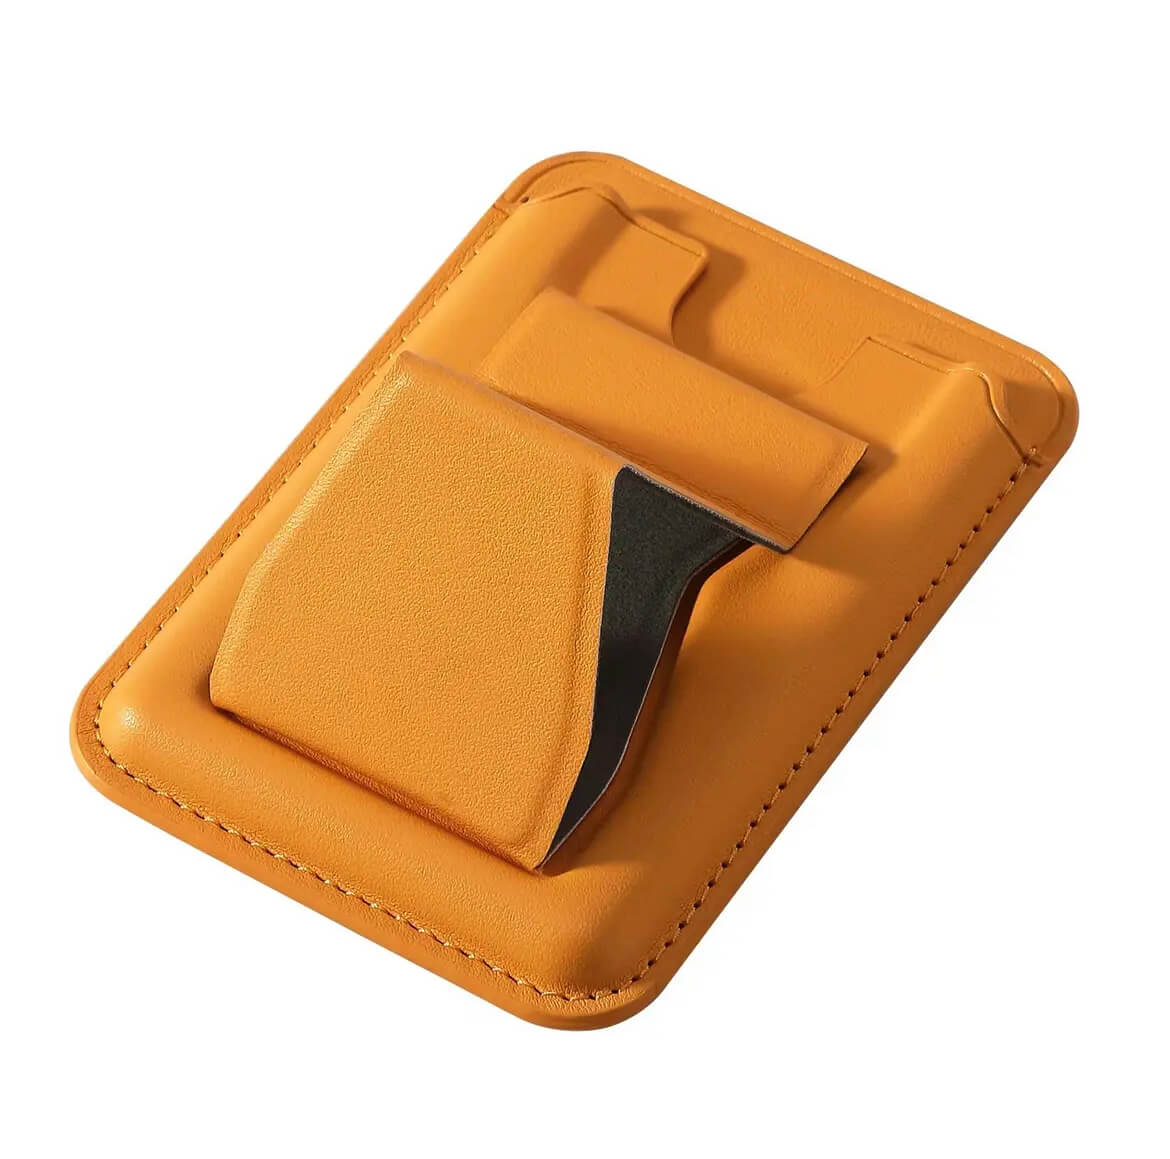 Leather iPhone wallet with holder for magnetic security device Apple_Shopier